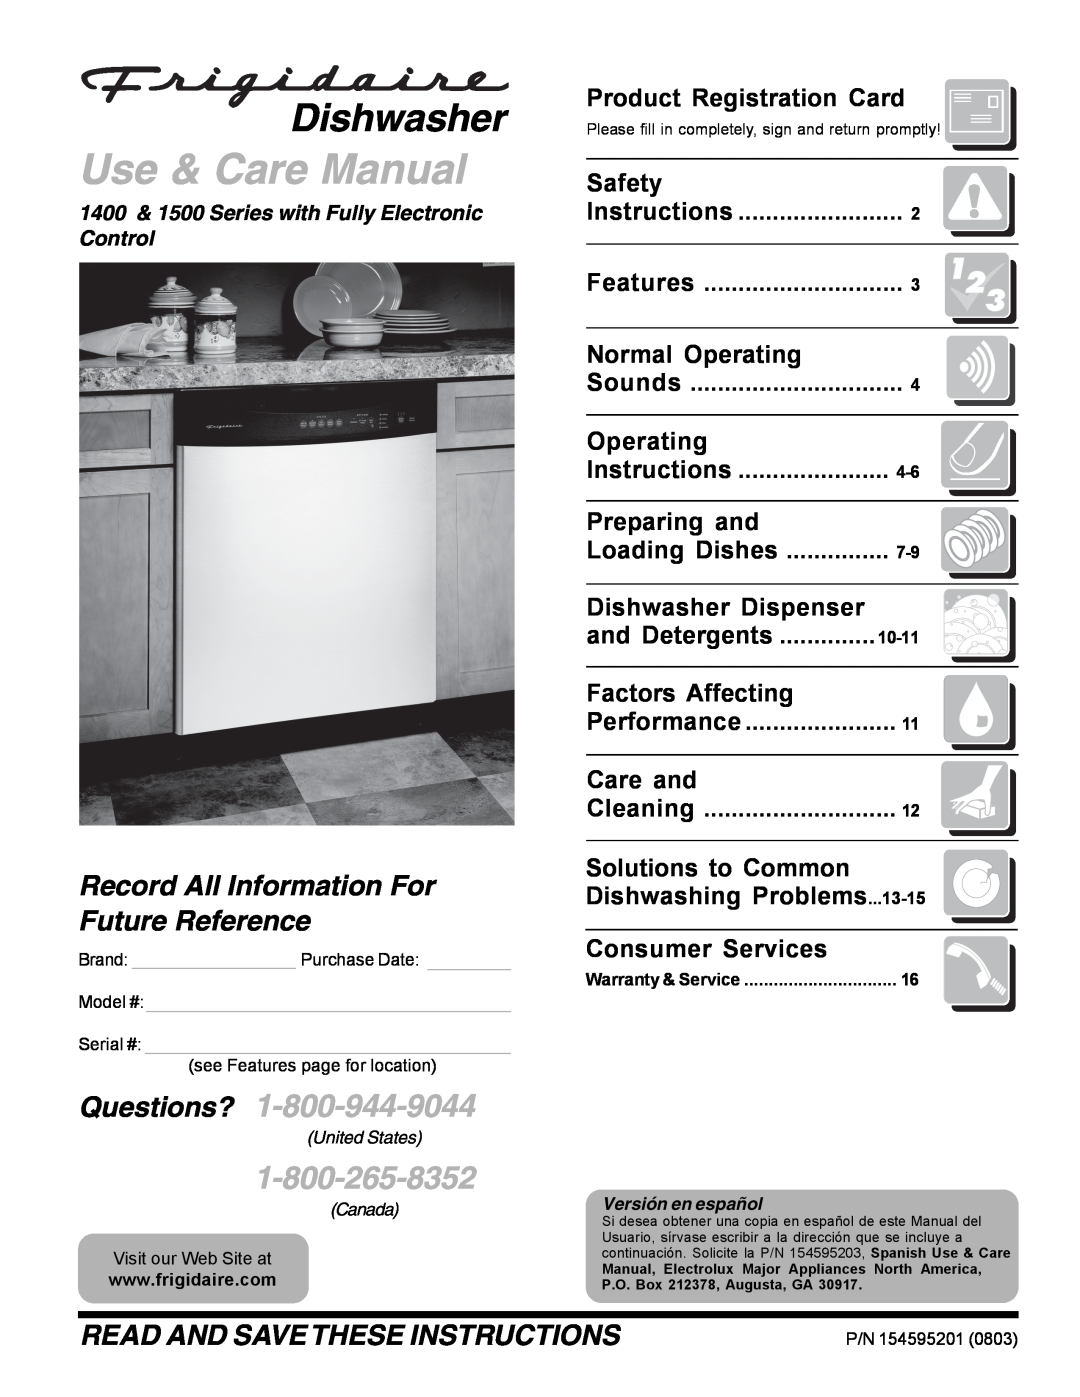 Frigidaire 1400 manual Product Registration Card, Safety, Normal Operating, Preparing and, Dishwasher Dispenser, Care and 